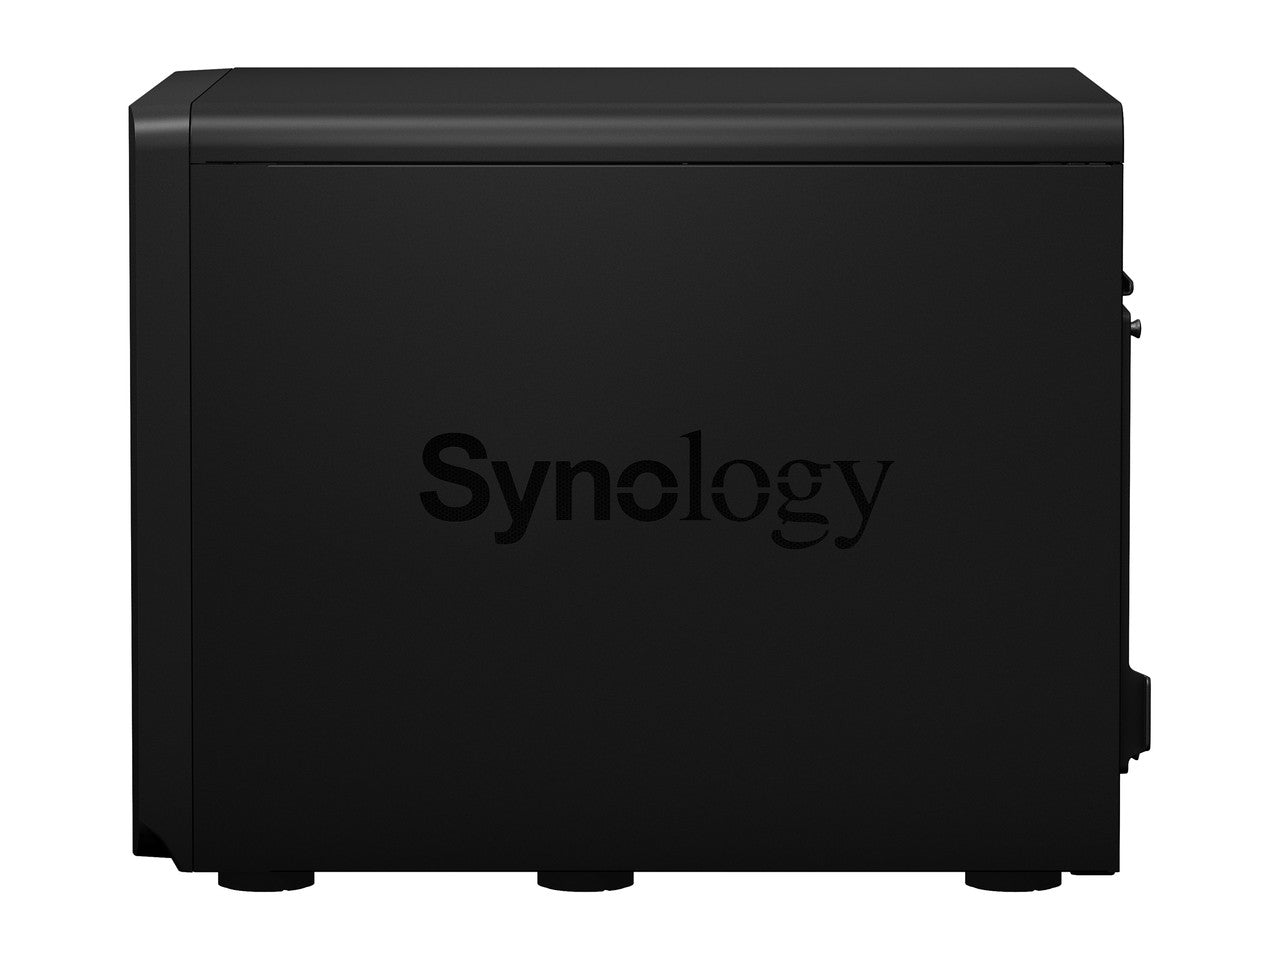 Synology DS2422+ Quad Core 2.2Ghz 12-Bay NAS with E10M20 10GbE Port and 1.6TB (2x800GB) CACHE, 8GB RAM and 192TB (12 x 16TB) of Synology Enterprise Drives